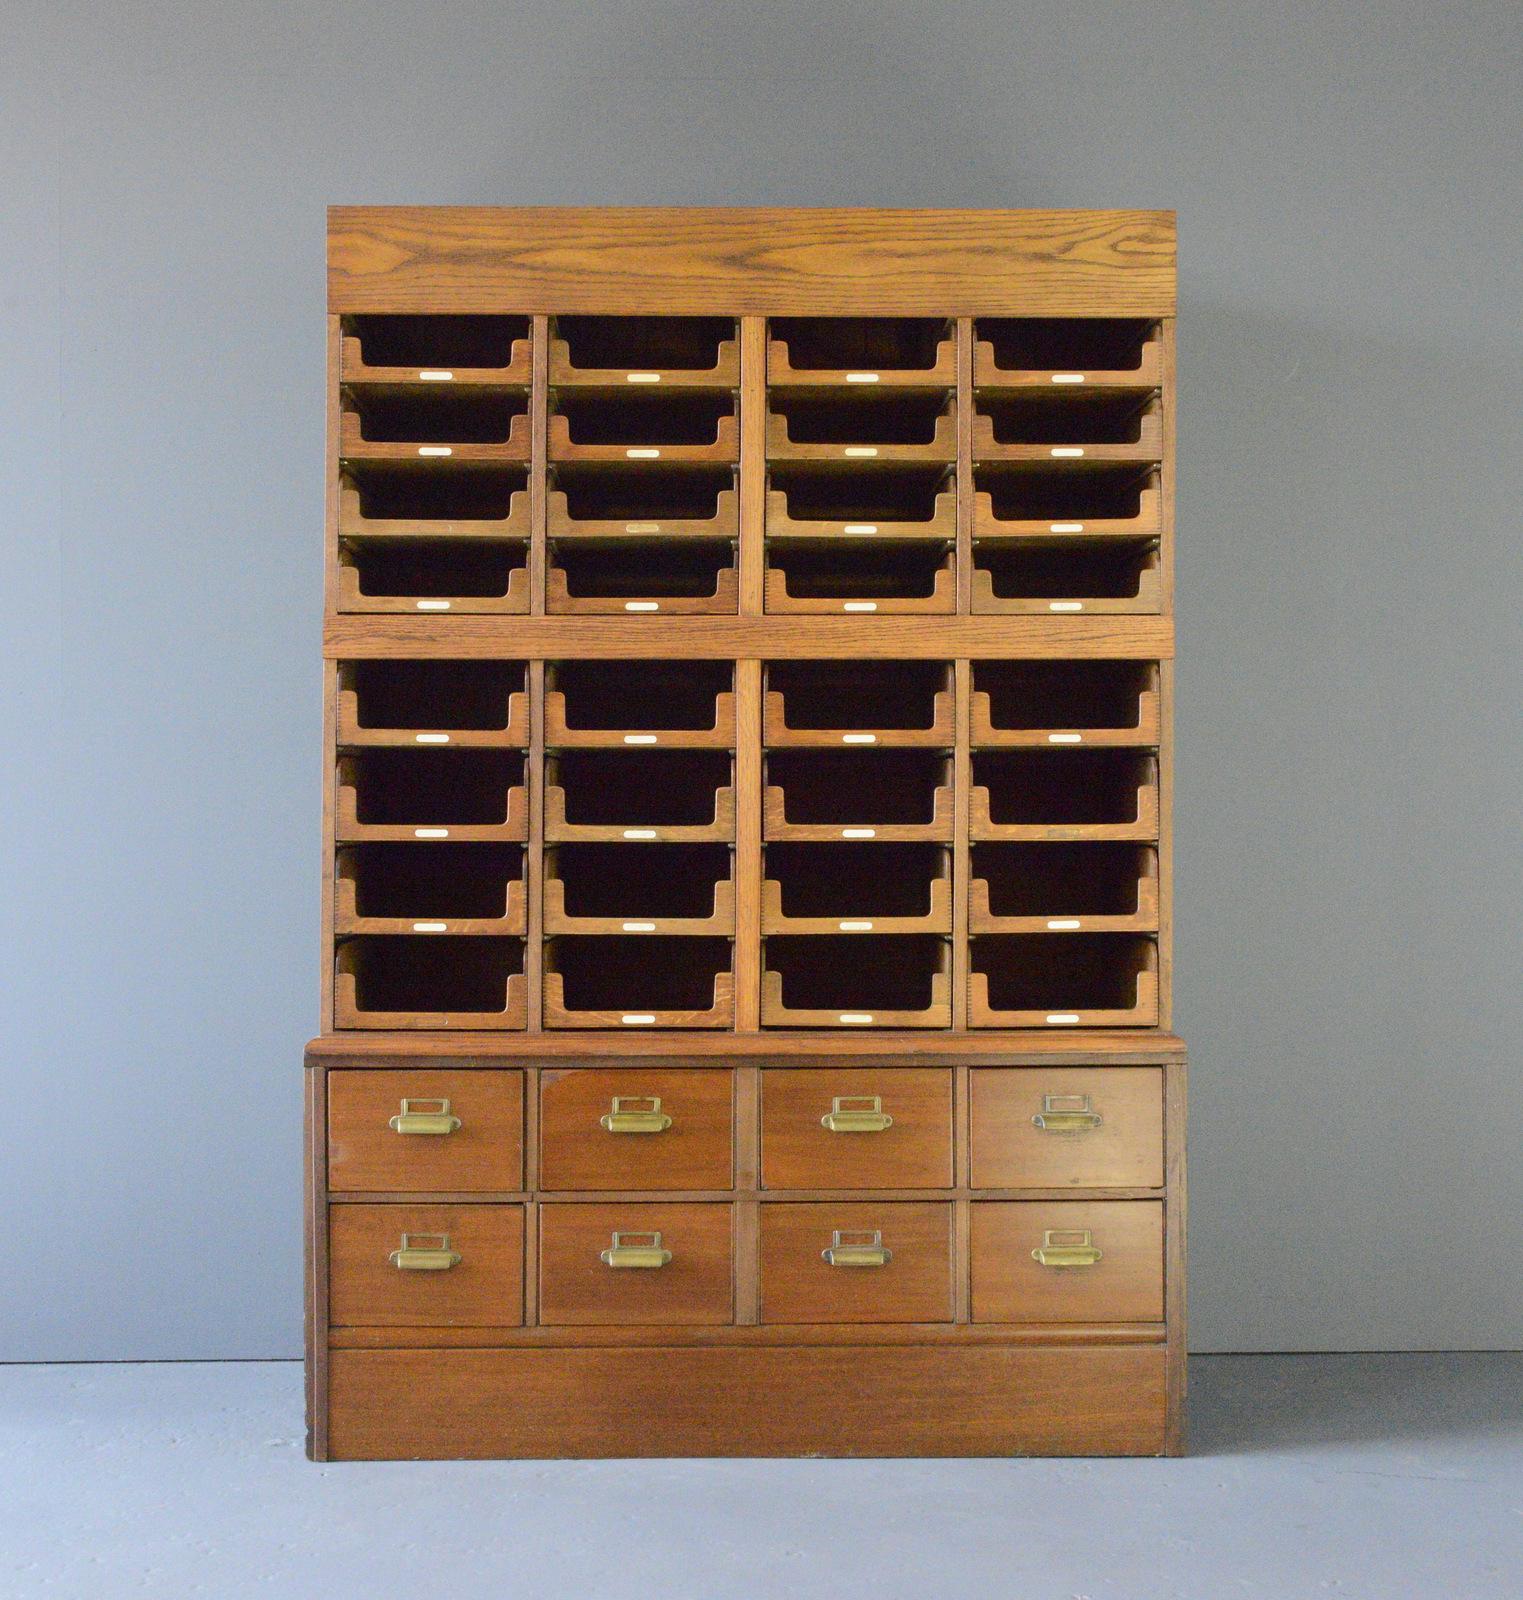 Haberdashery Cabinet By E Pollard & Co circa 1910

- Solid Oak throughout
- Panelled sides
- 32 pullout drawers
- 8 Larger drawers
- English ~ 1910 
- 141cm wide x 207cm tall x 61cm deep

Condition Report

Fully restored, cleaned and